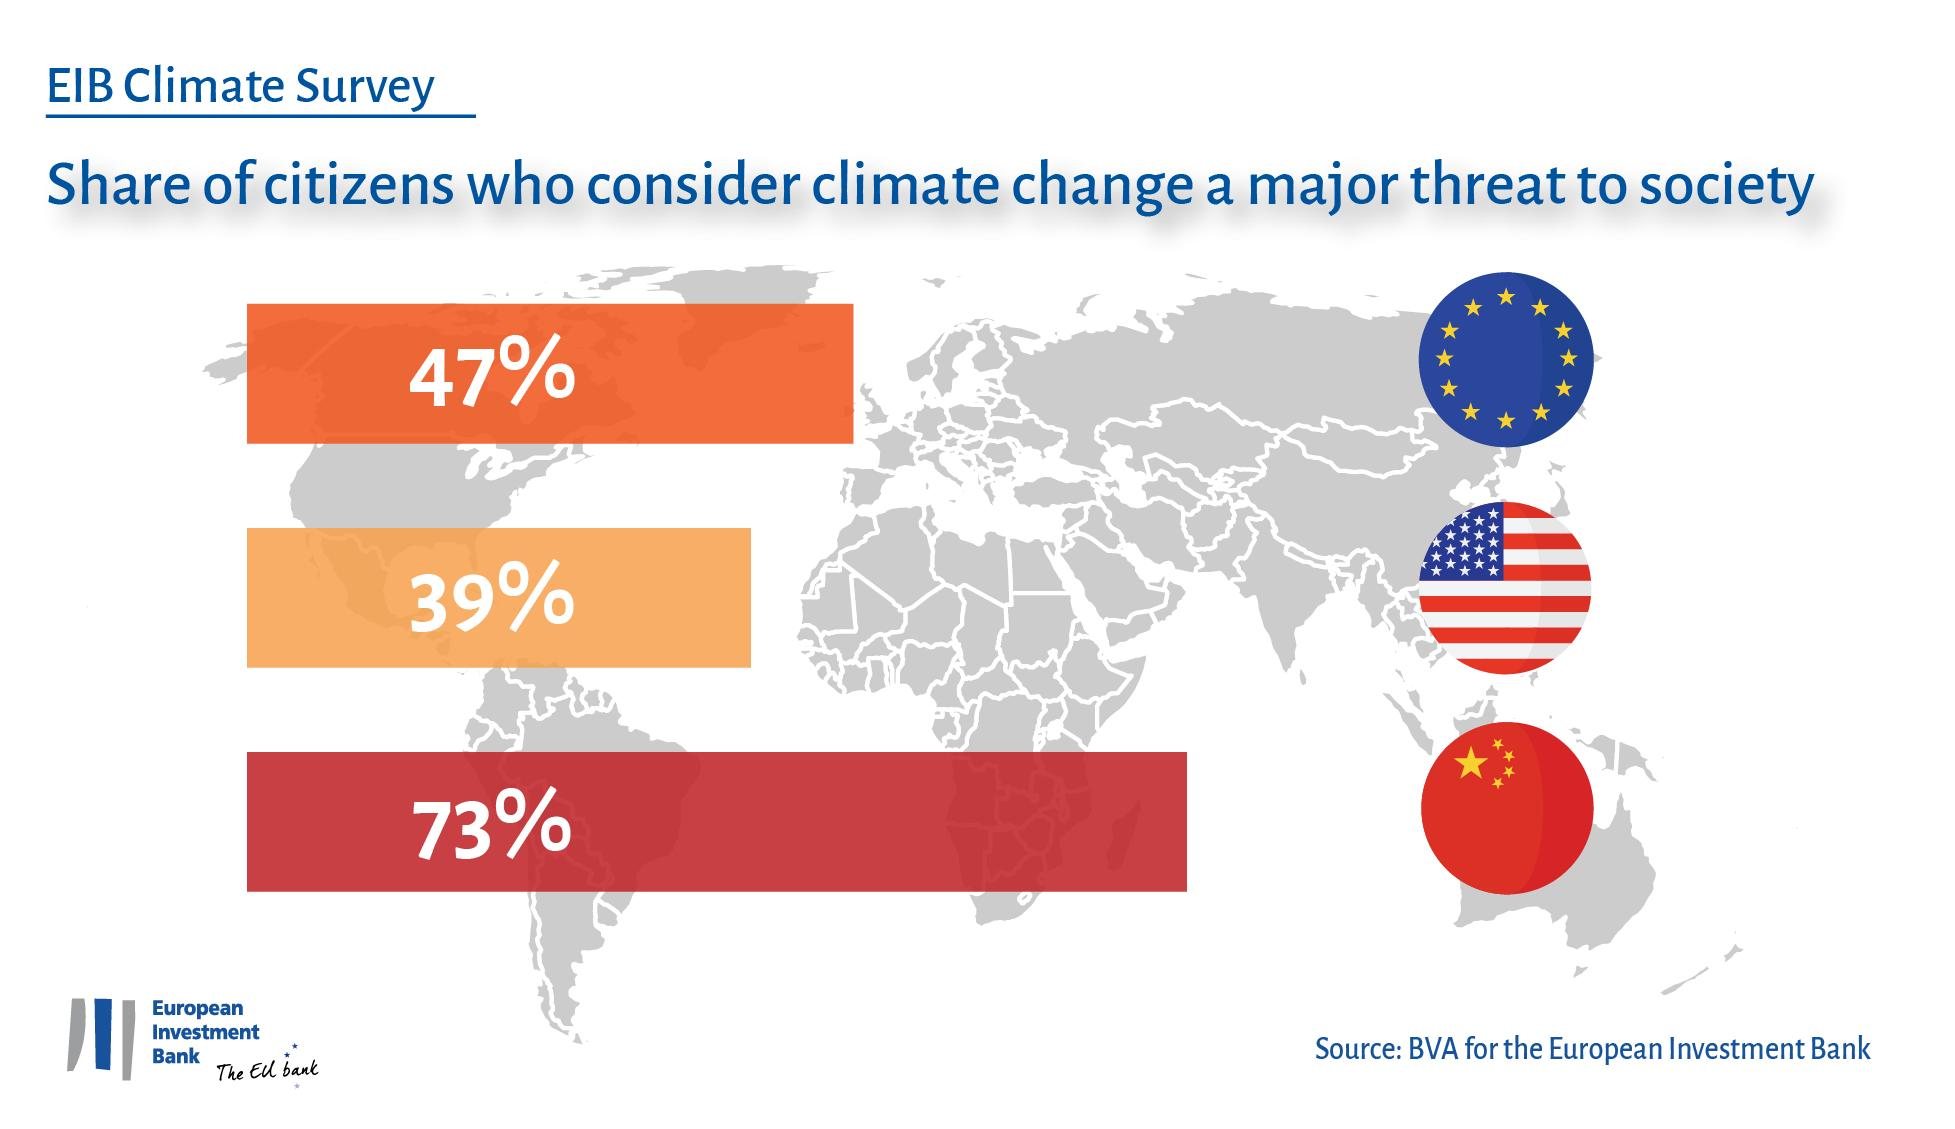 Climate change more feared by the Chinese than by EU or US citizens